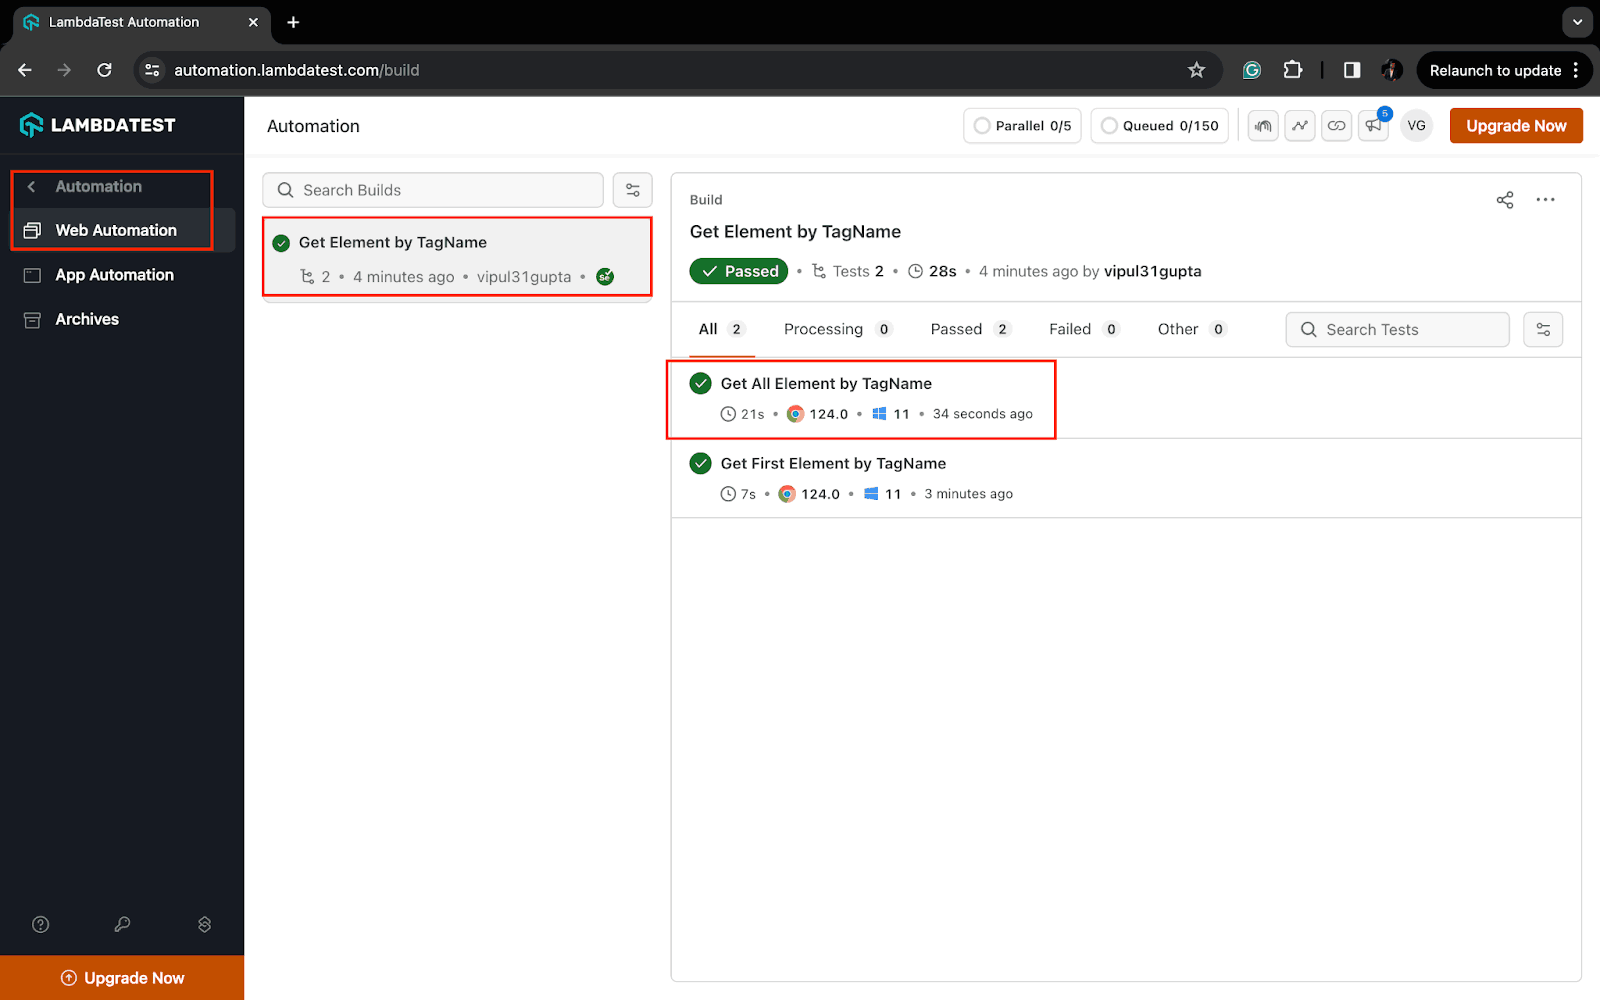  test execution results will be displayed on the LambdaTest Dashboard